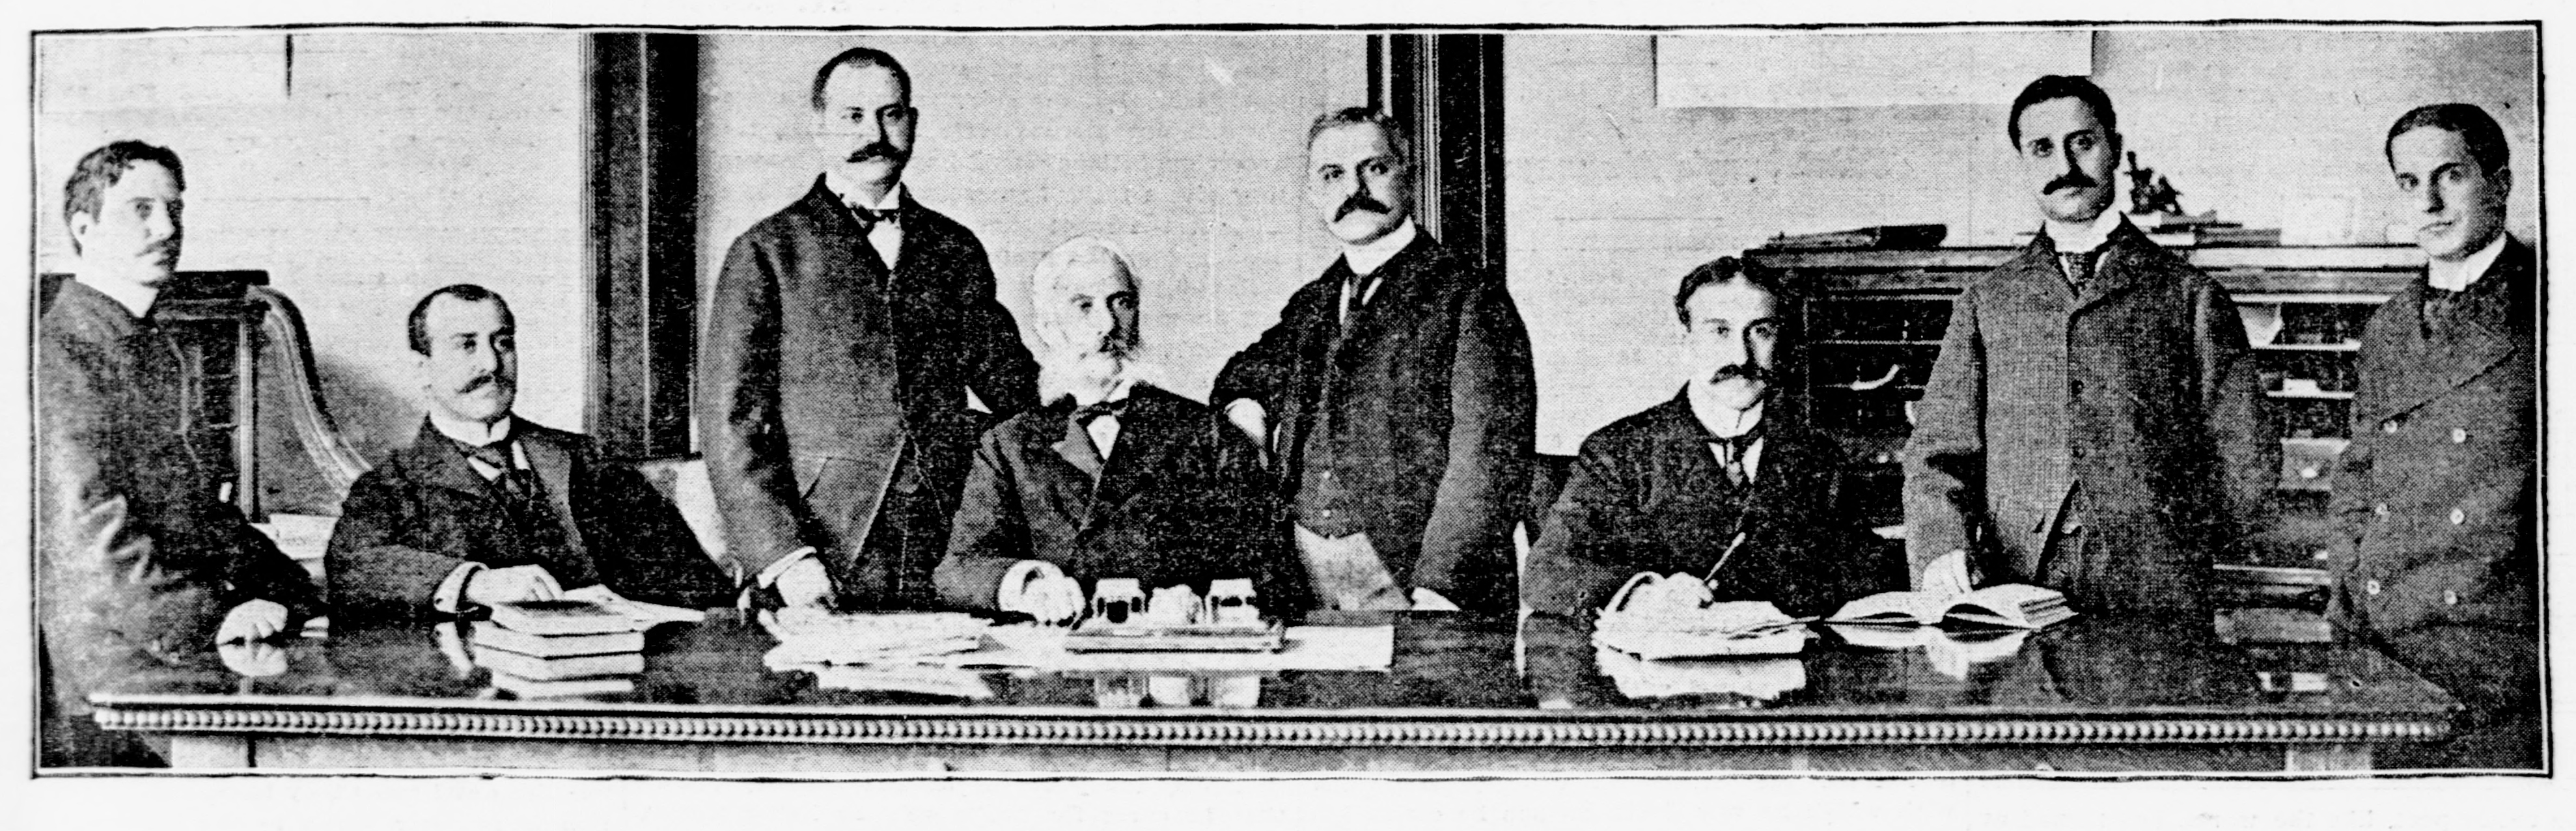 The beginning of a dynasty: Meyer Guggenheim (4th from left) and his seven sons.BRIDGEMAN IMAGES / THE STAPLETON COLLECTION